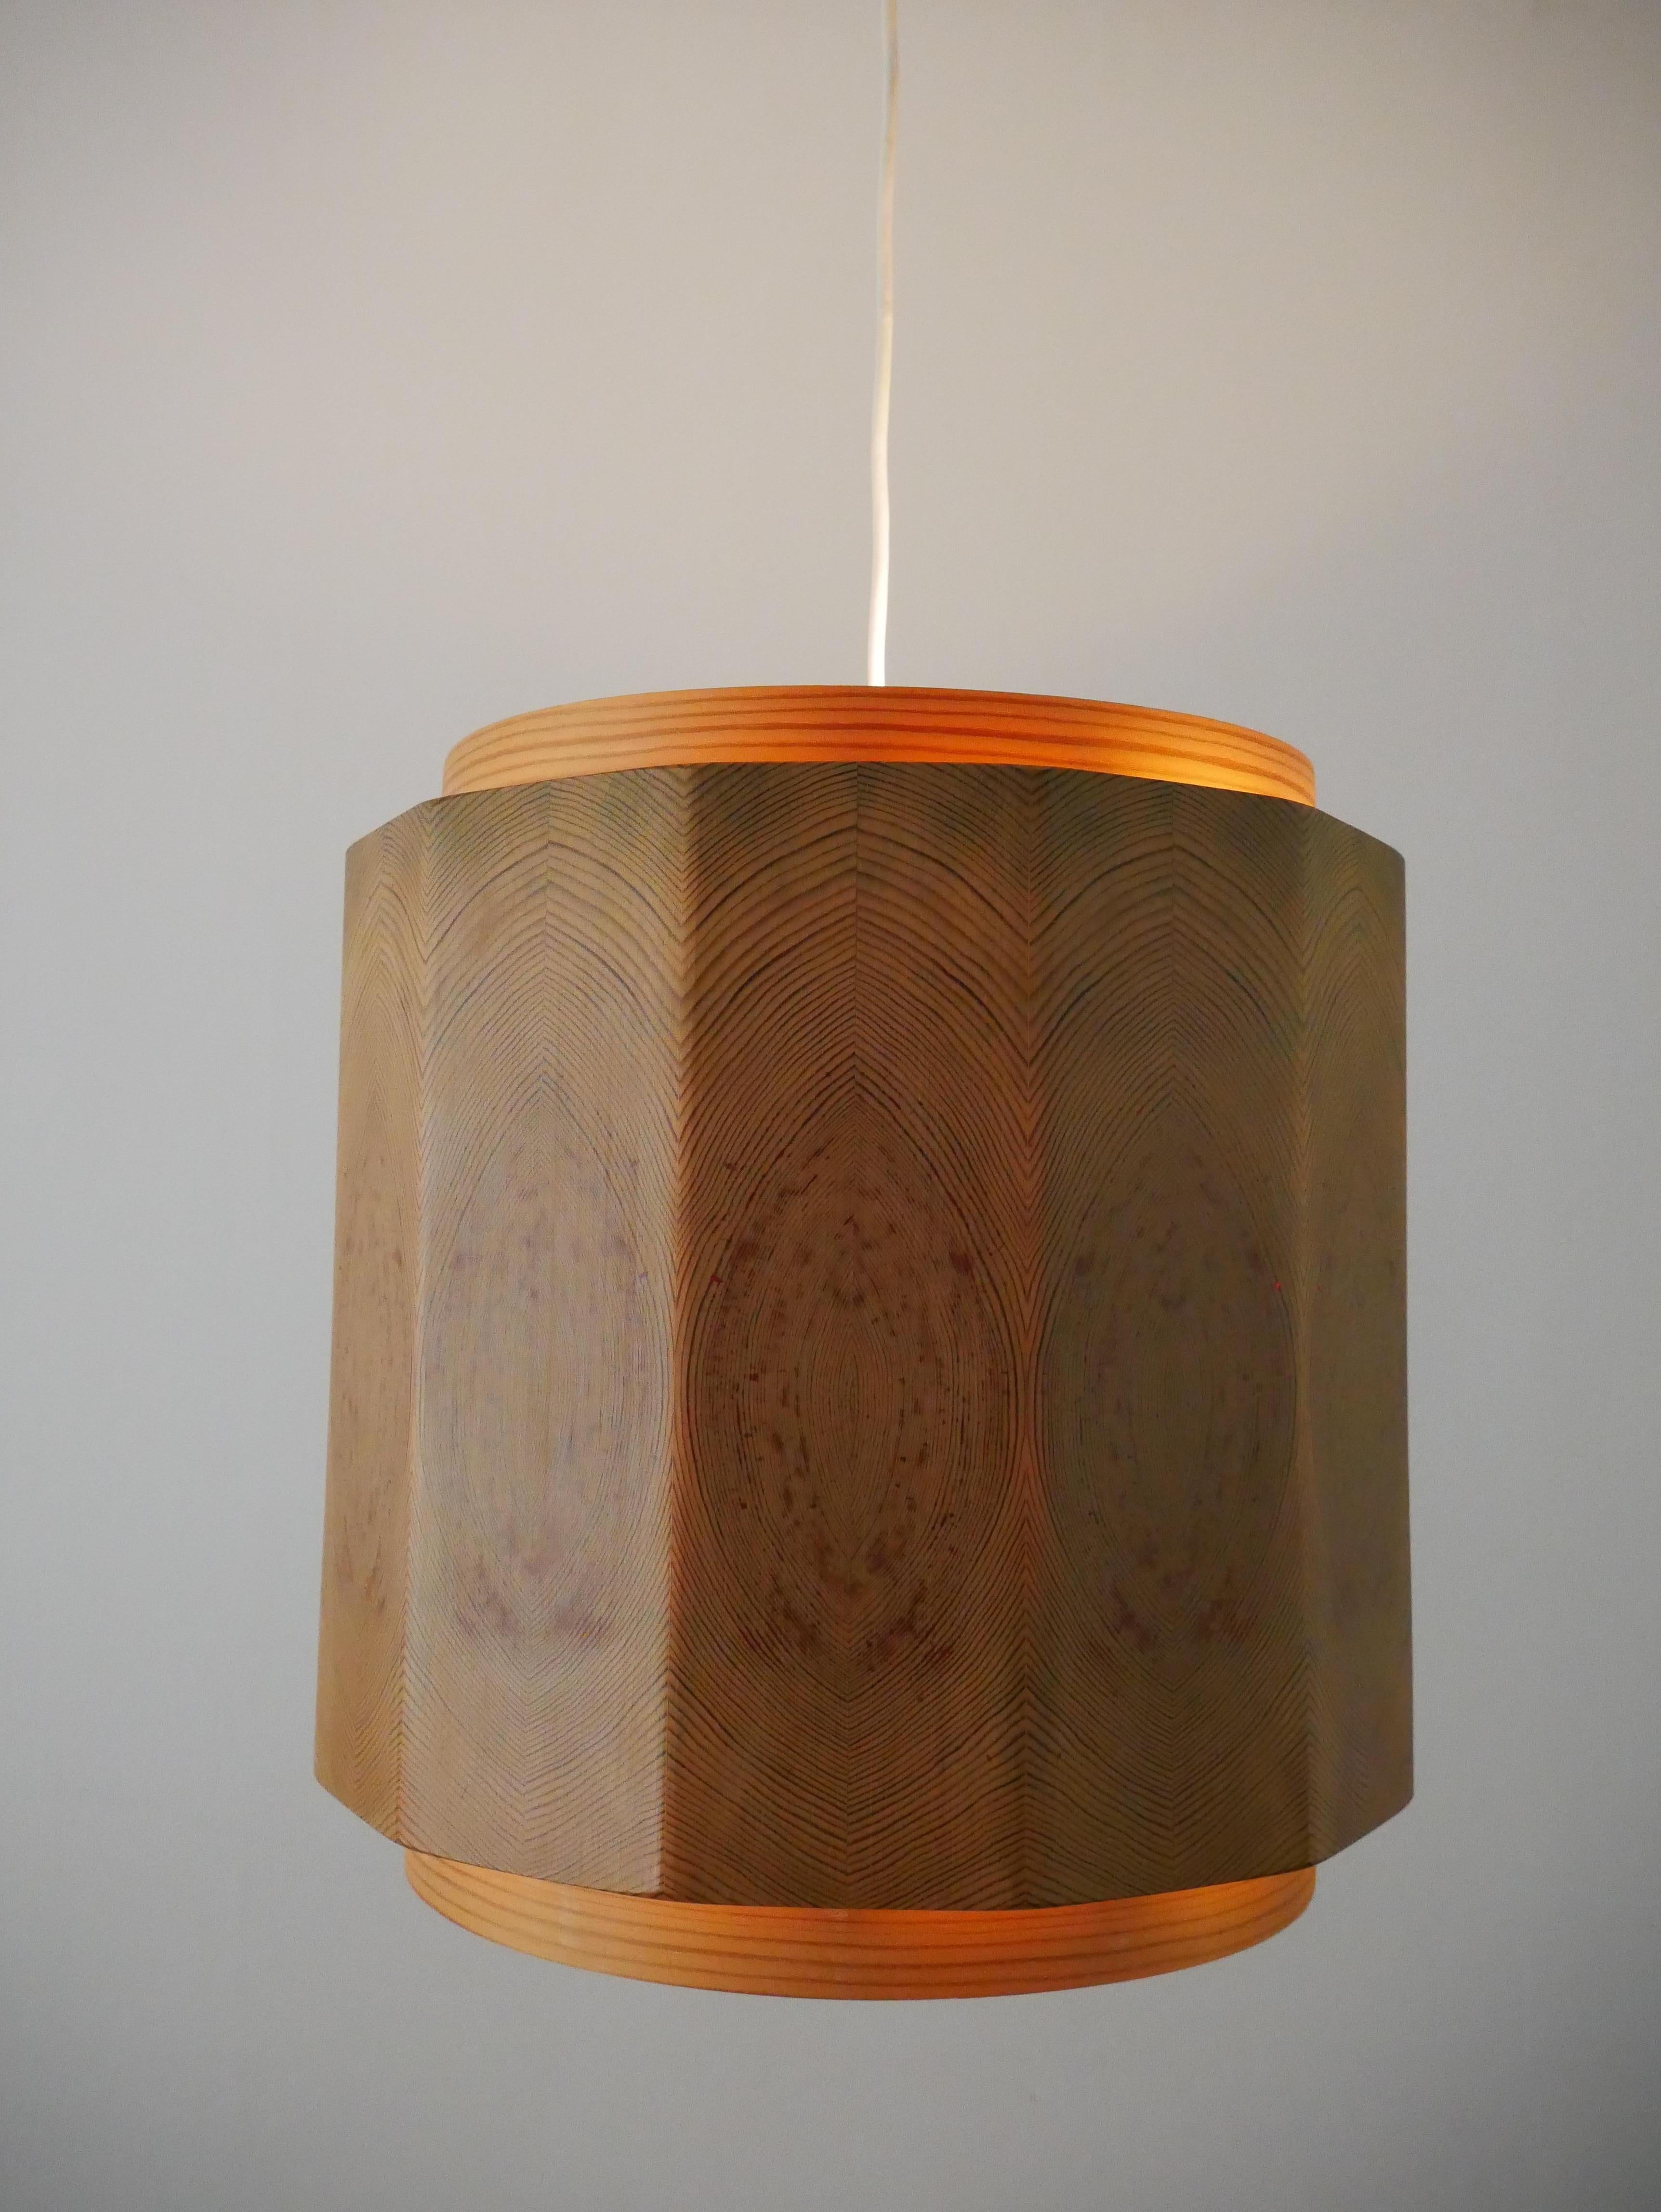 Hand-Crafted Big pendent Lamp by Leif Wikner 1960s For Sale